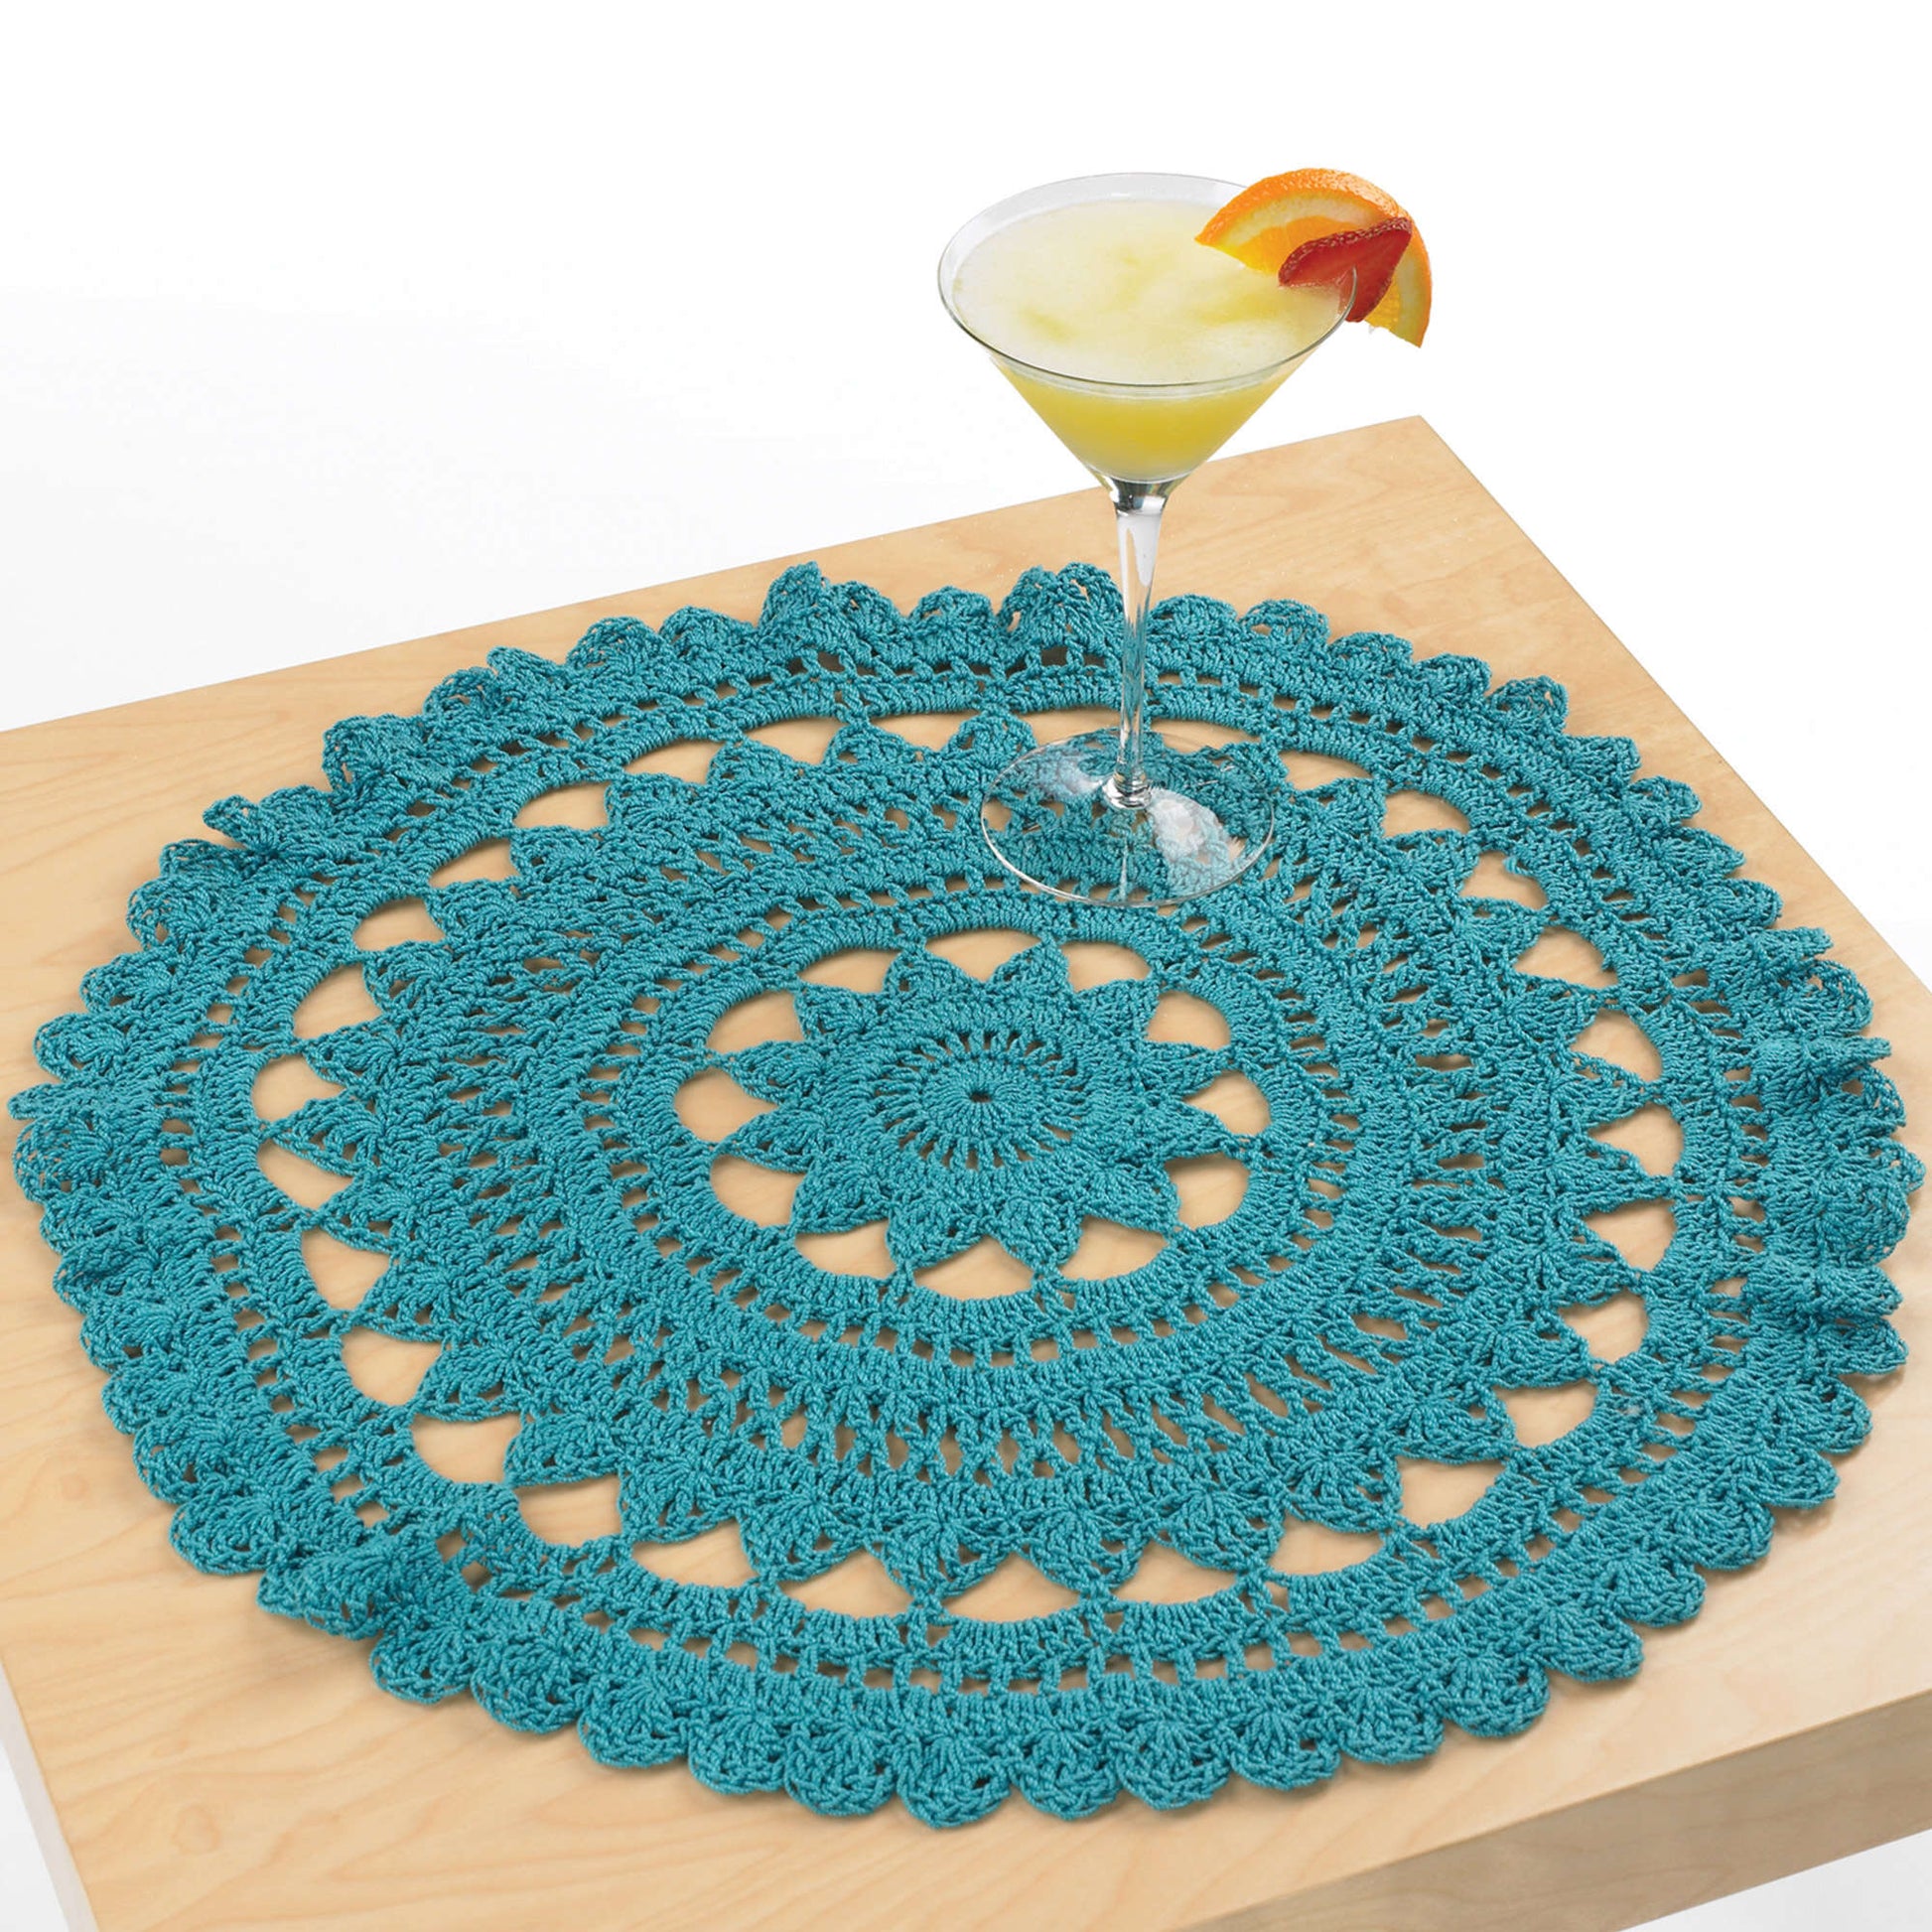 Aunt Lydia's Crochet Thread is GREAT for doilies! 